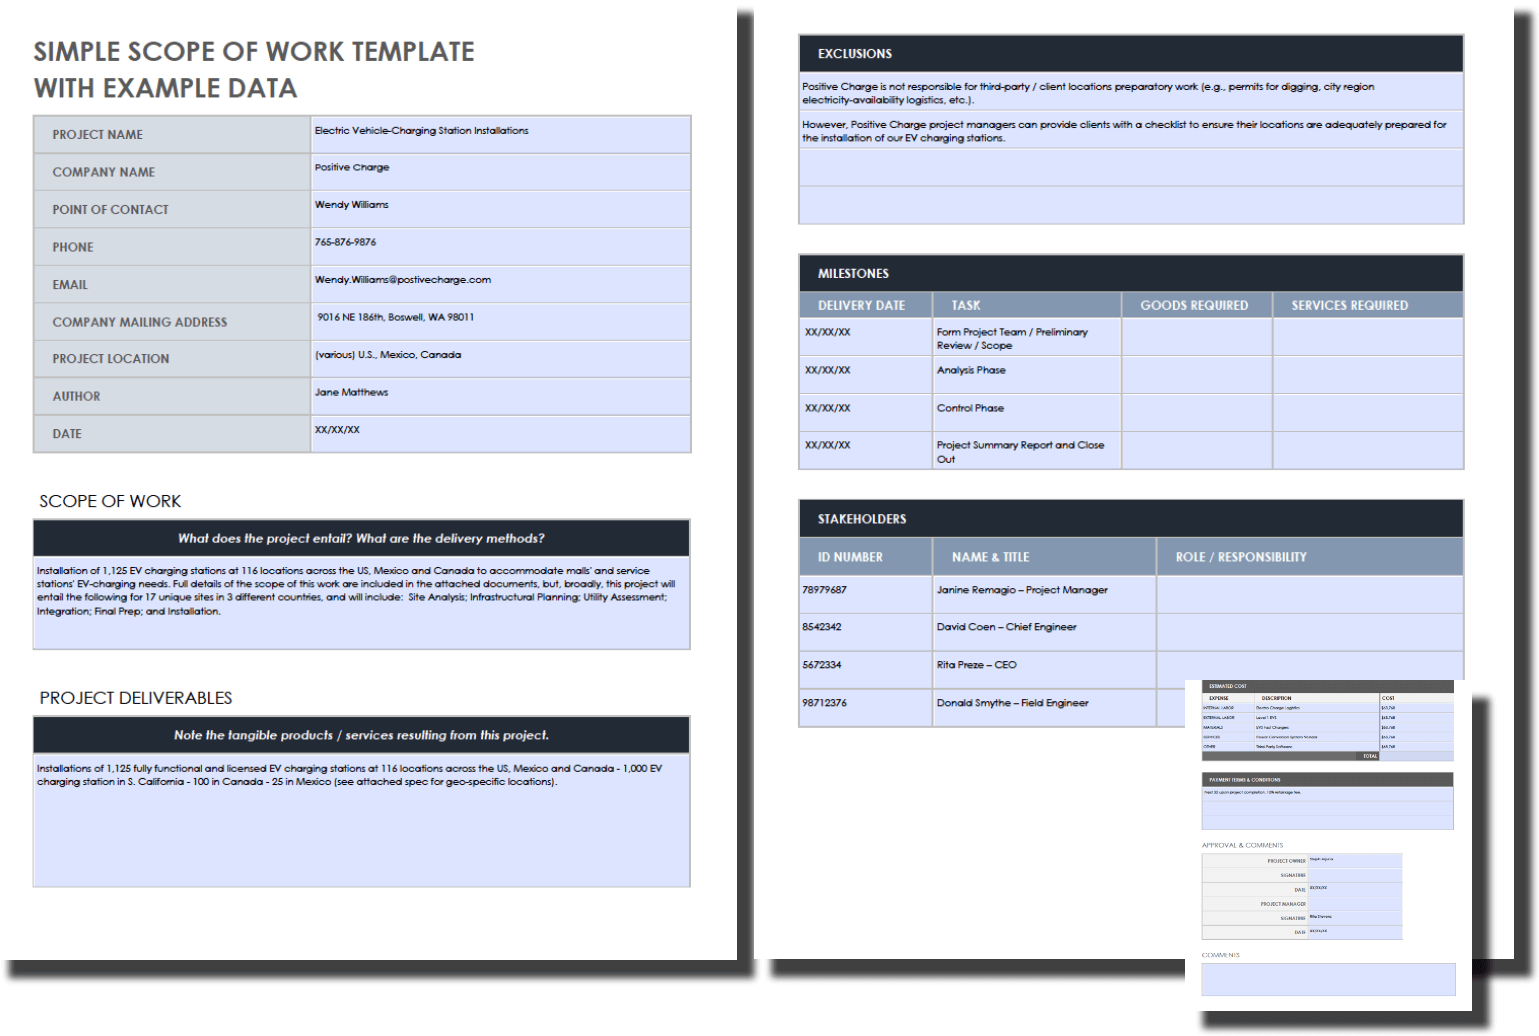 Basic Scope of Work Example Template PDF